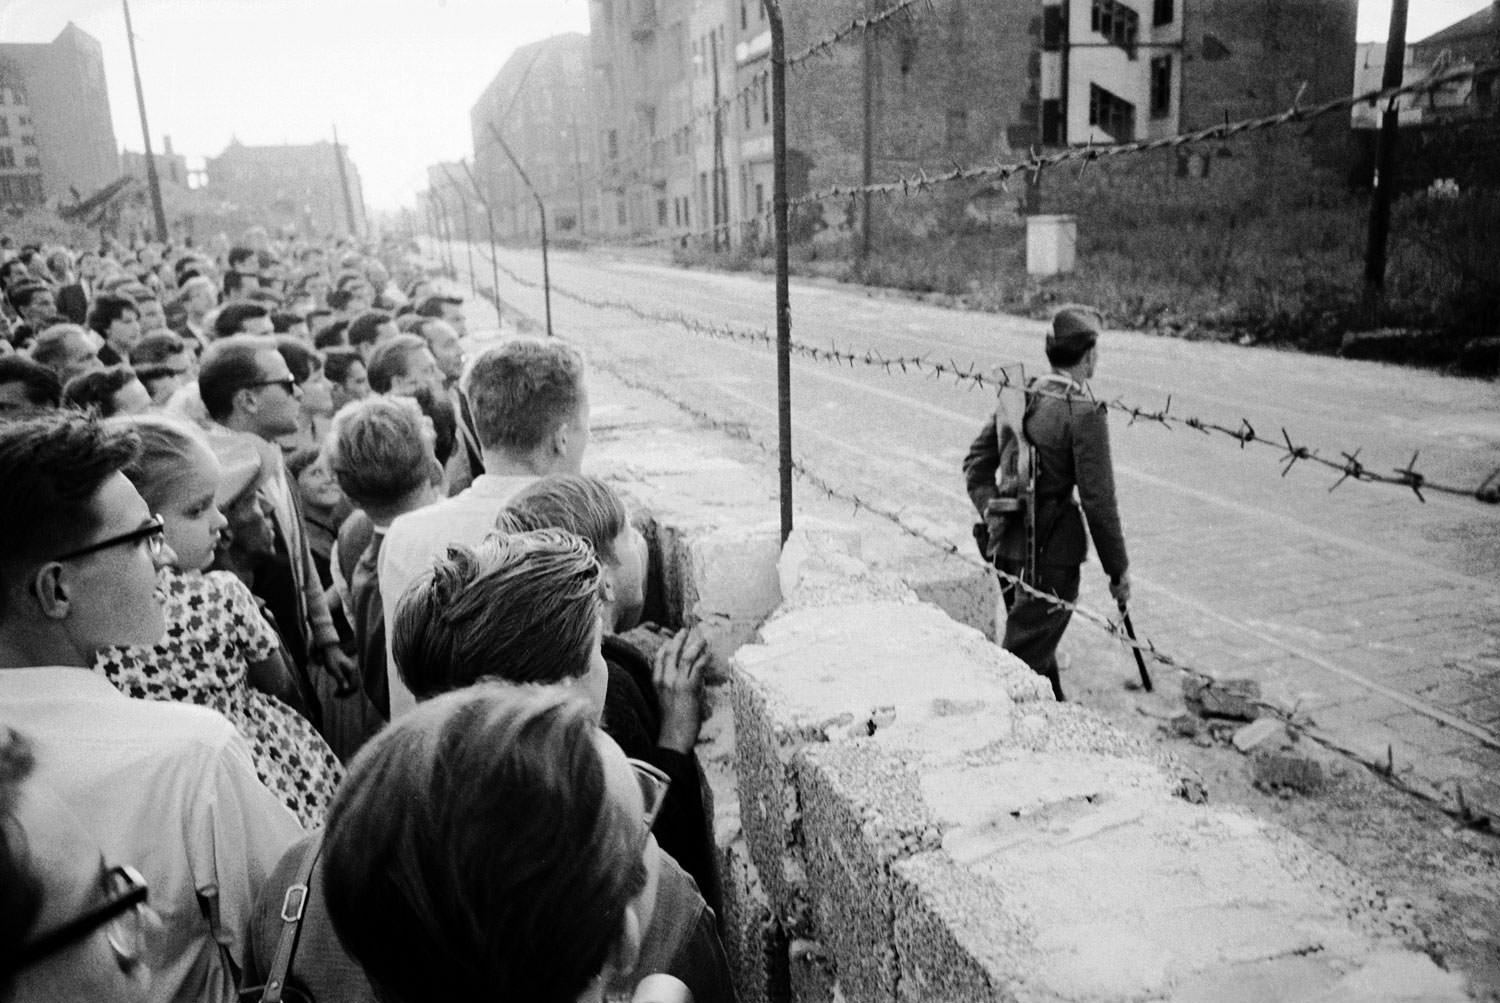 A crowd of West Berlin residents watches as an East German policeman patrols the Berlin Wall in August 1961.